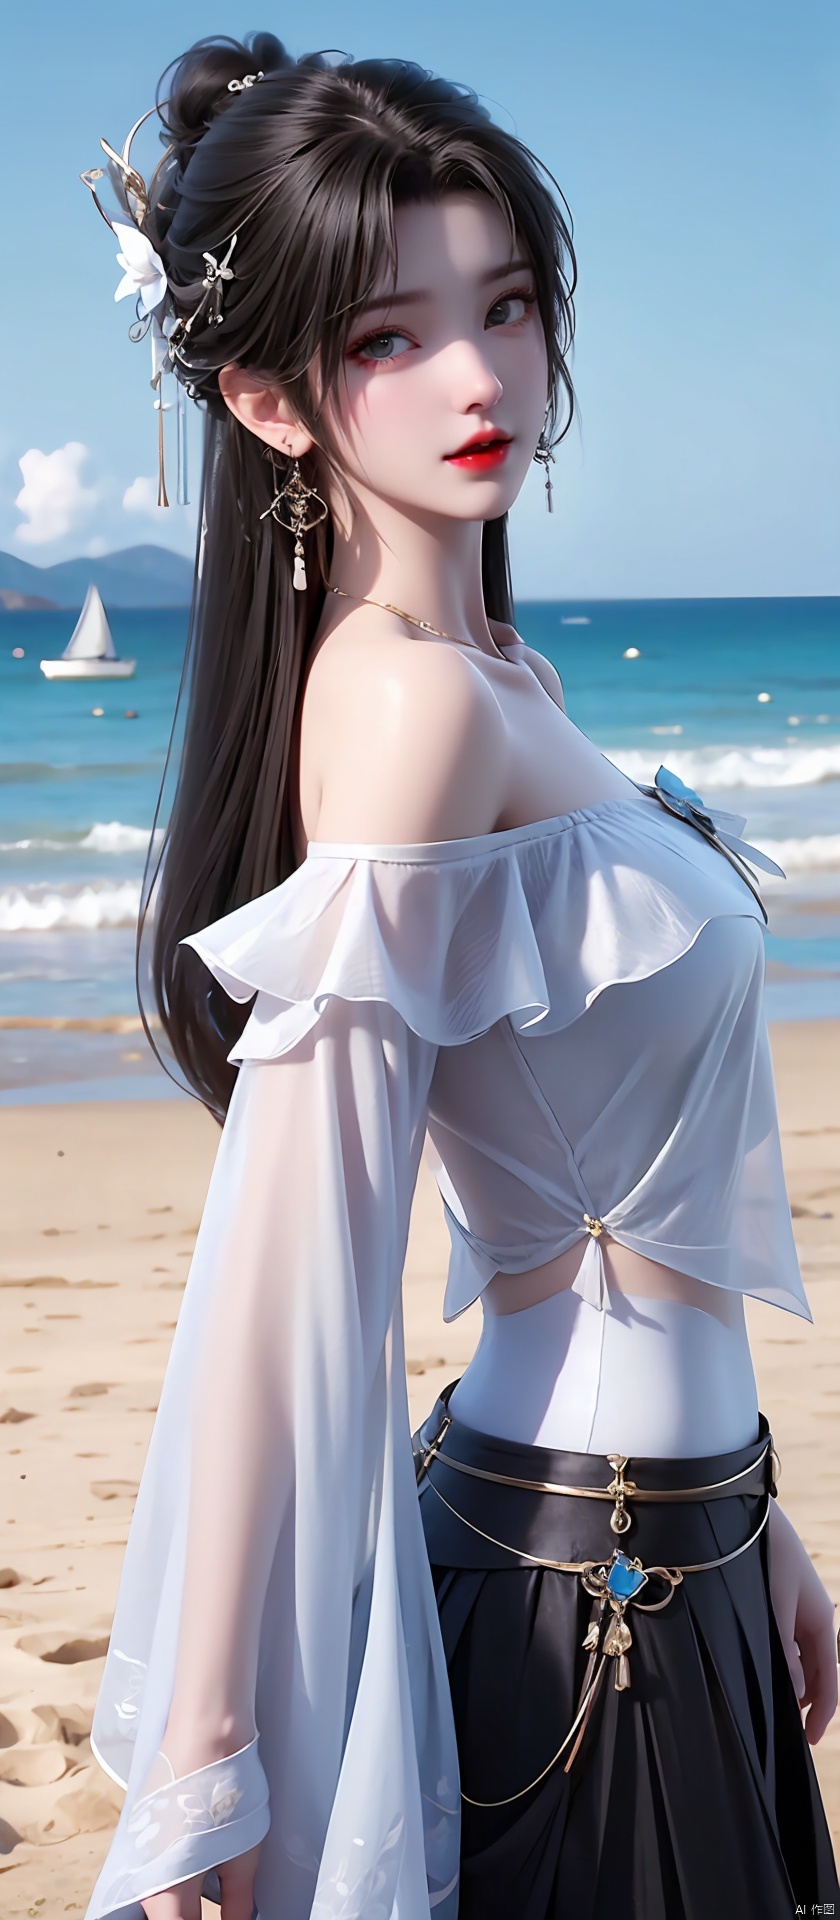  (((1 girl))),((upper body:0.7)), half body photo, female solo, depth of field, blue earrings, blue jewelry, off-shoulder white shirt, black tight skirt, (at beach), blonde hair, photorealistic:1.3, realistic), highly detailed CG unified 8K wallpapers, (((straight from front))), 8k uhd, dslr, soft lighting, high quality, film grain, Fujifilm XT3, (professional lighting), nangongwan, red lips,